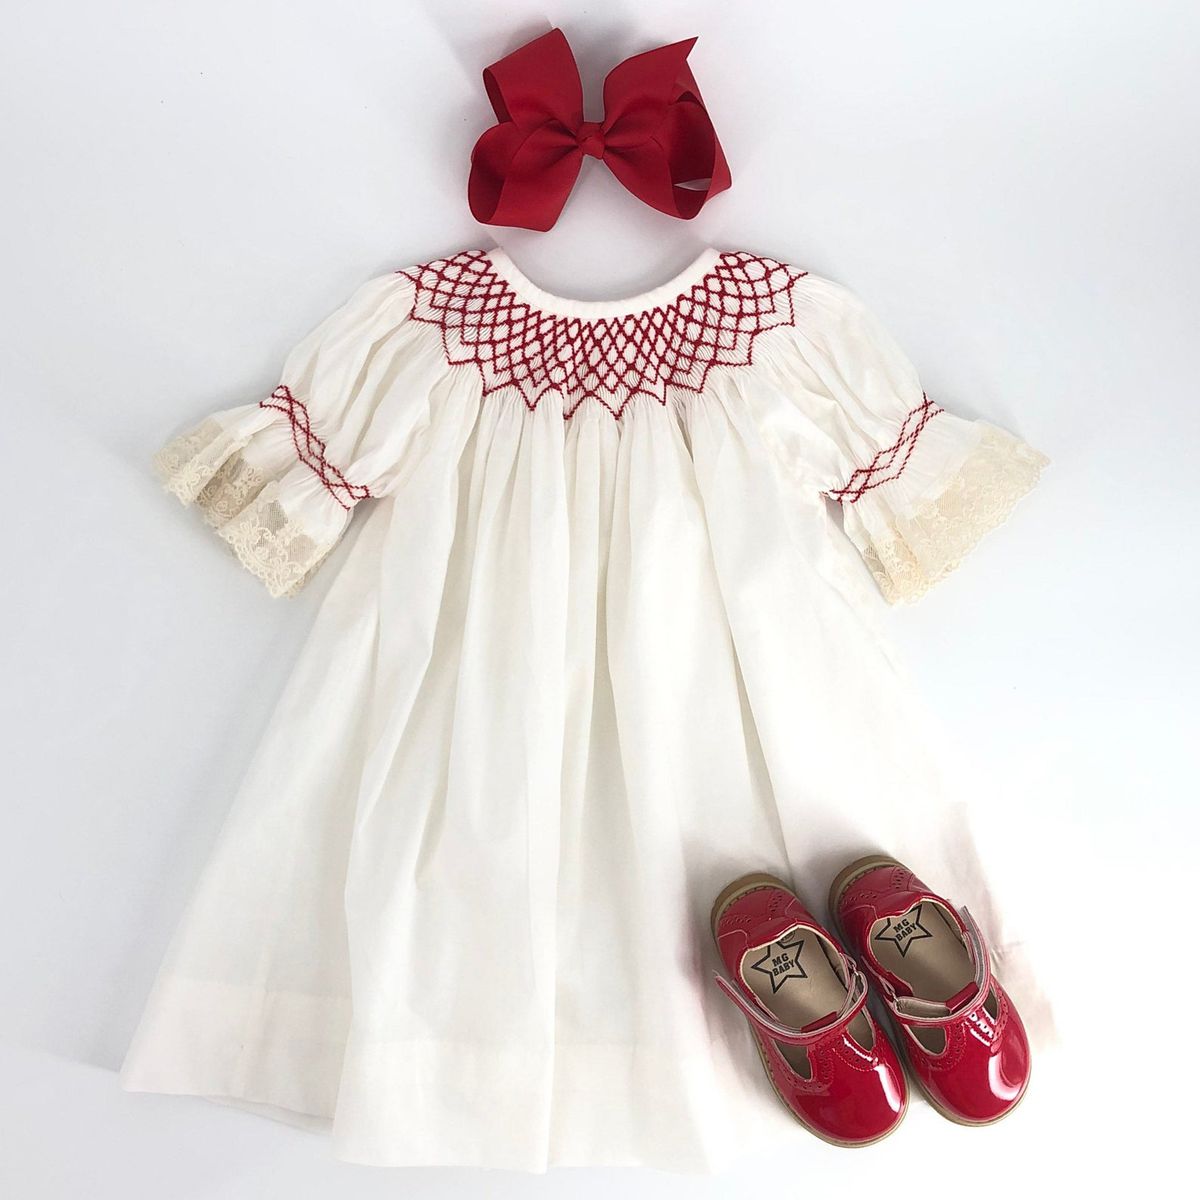 Snow Outfit Toddler Girl Winter Smocked Dress Christmas Girls Dress Christmas Dress Snow Dress Smocked Dress Girls Smocked Bishop